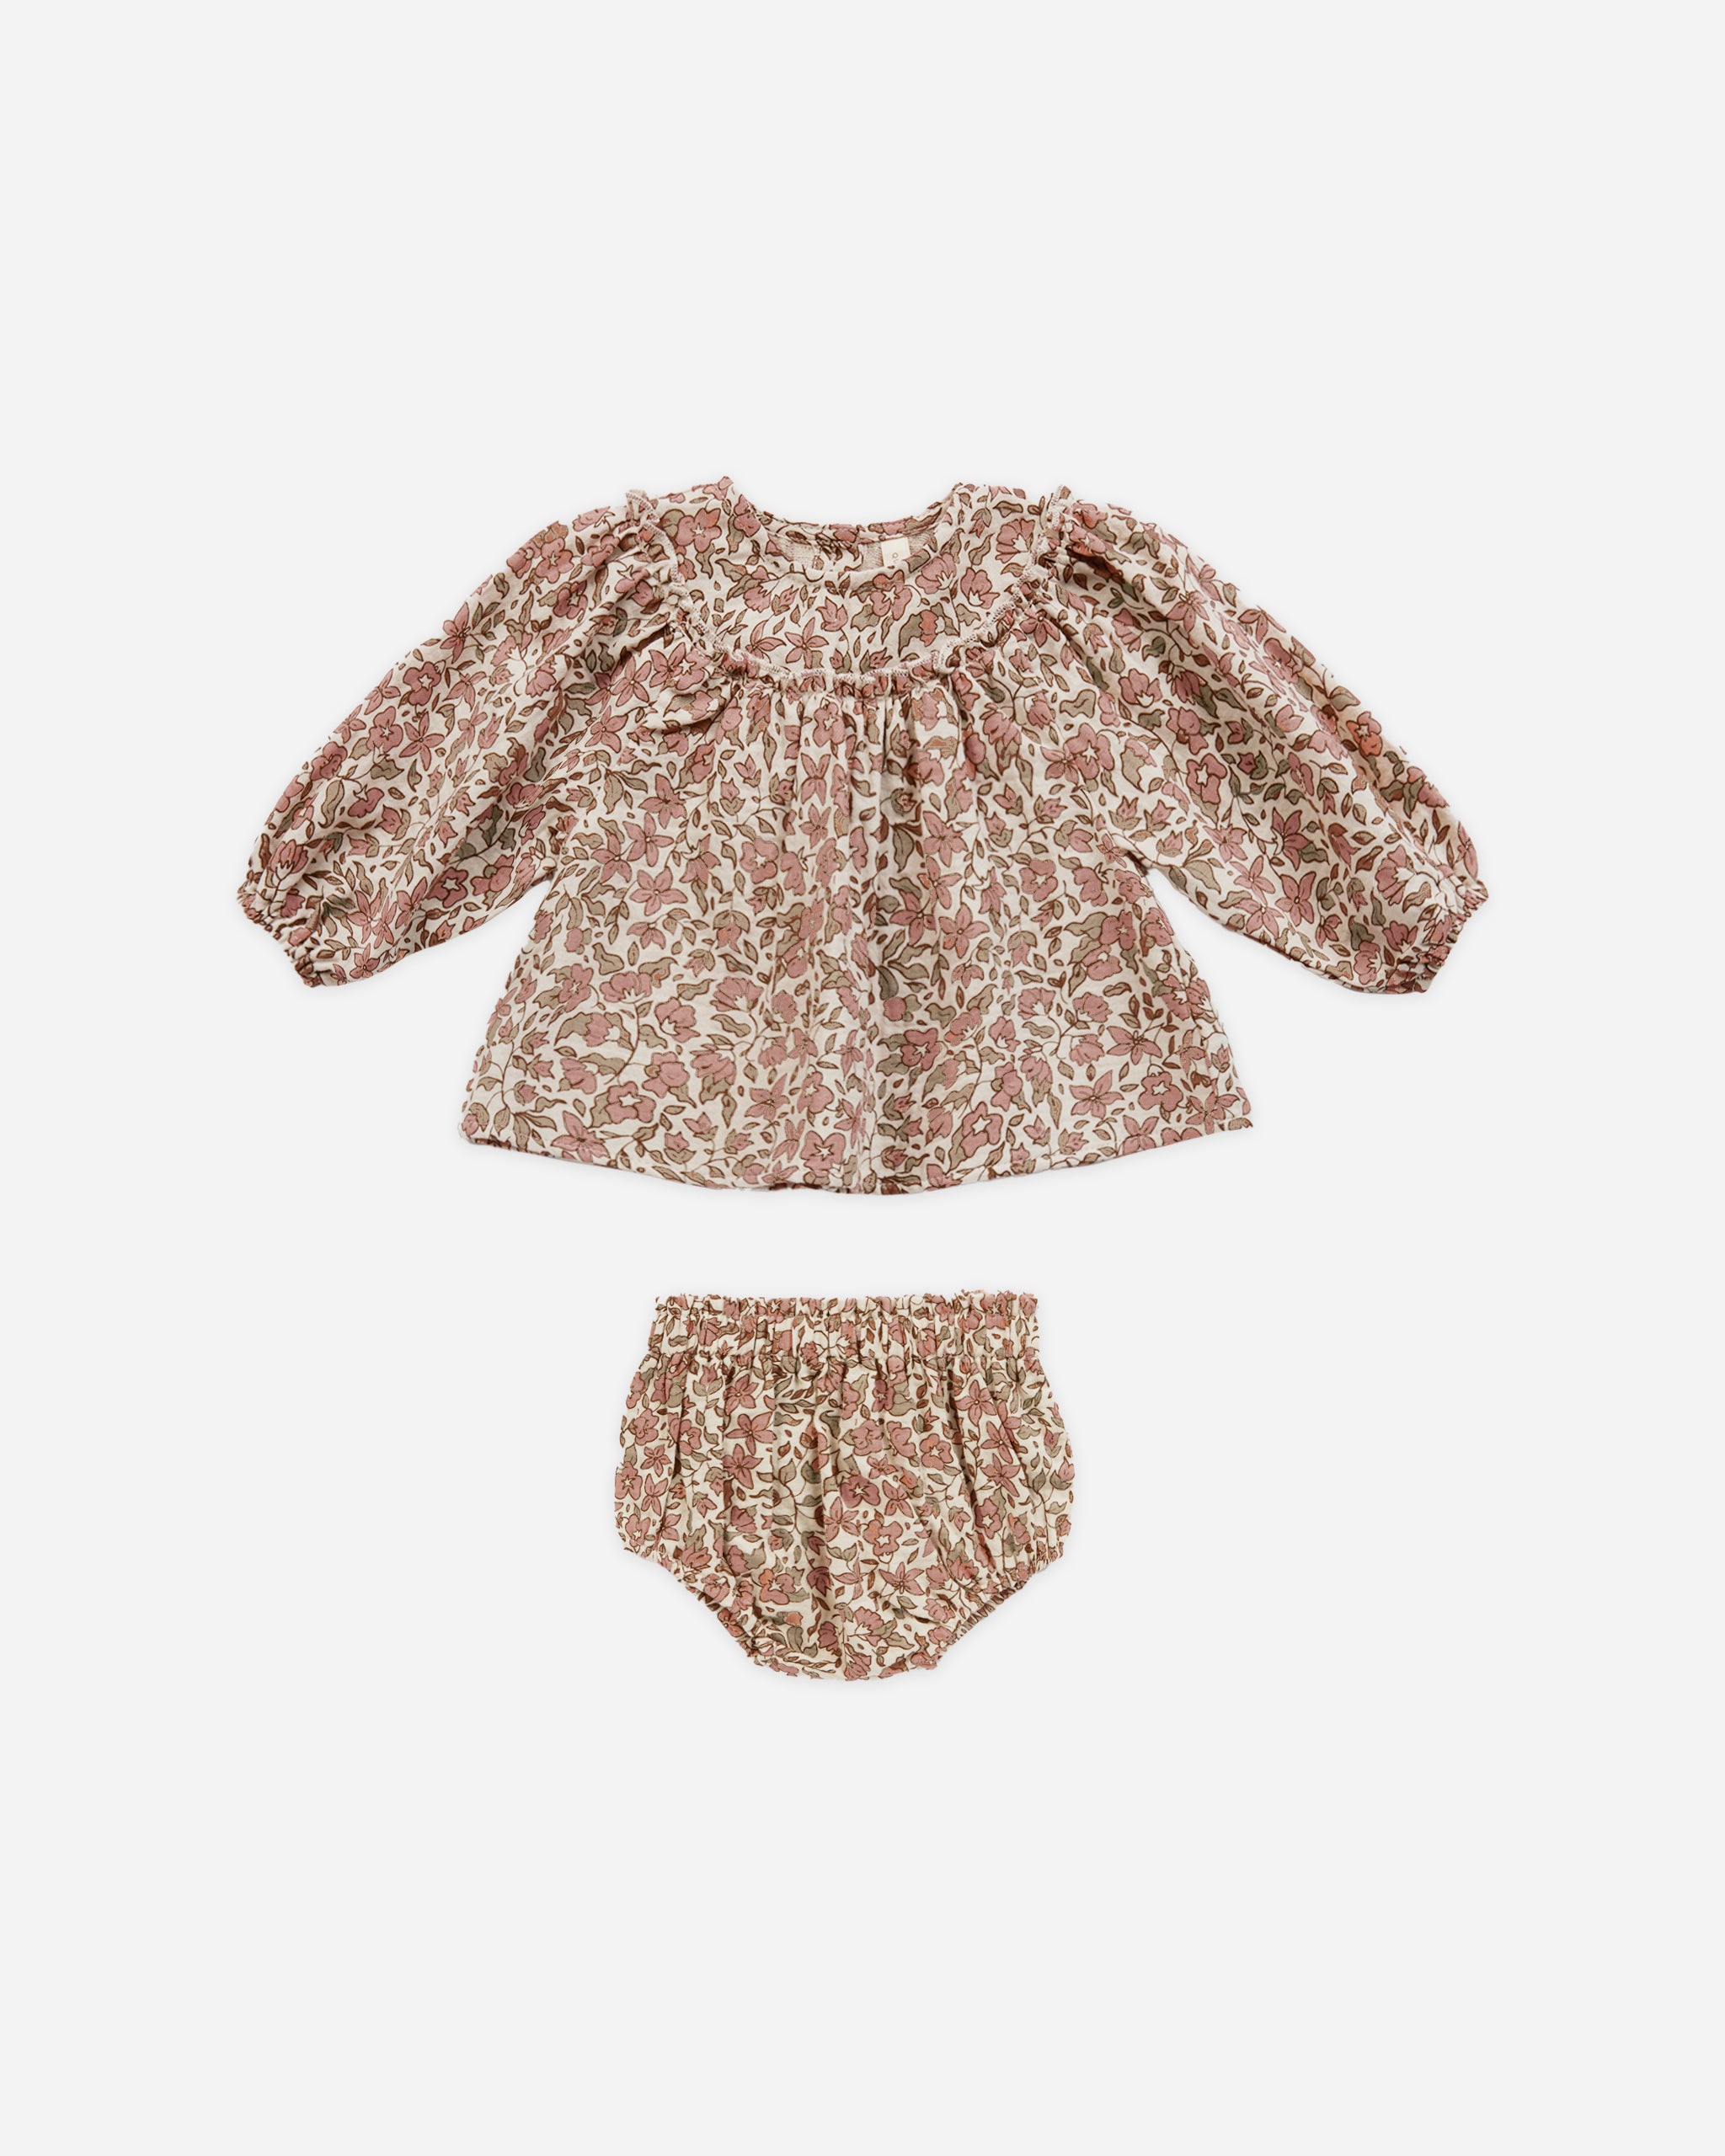 Mia Top + Bloomer Set || Camellia - Rylee + Cru | Kids Clothes | Trendy Baby Clothes | Modern Infant Outfits |